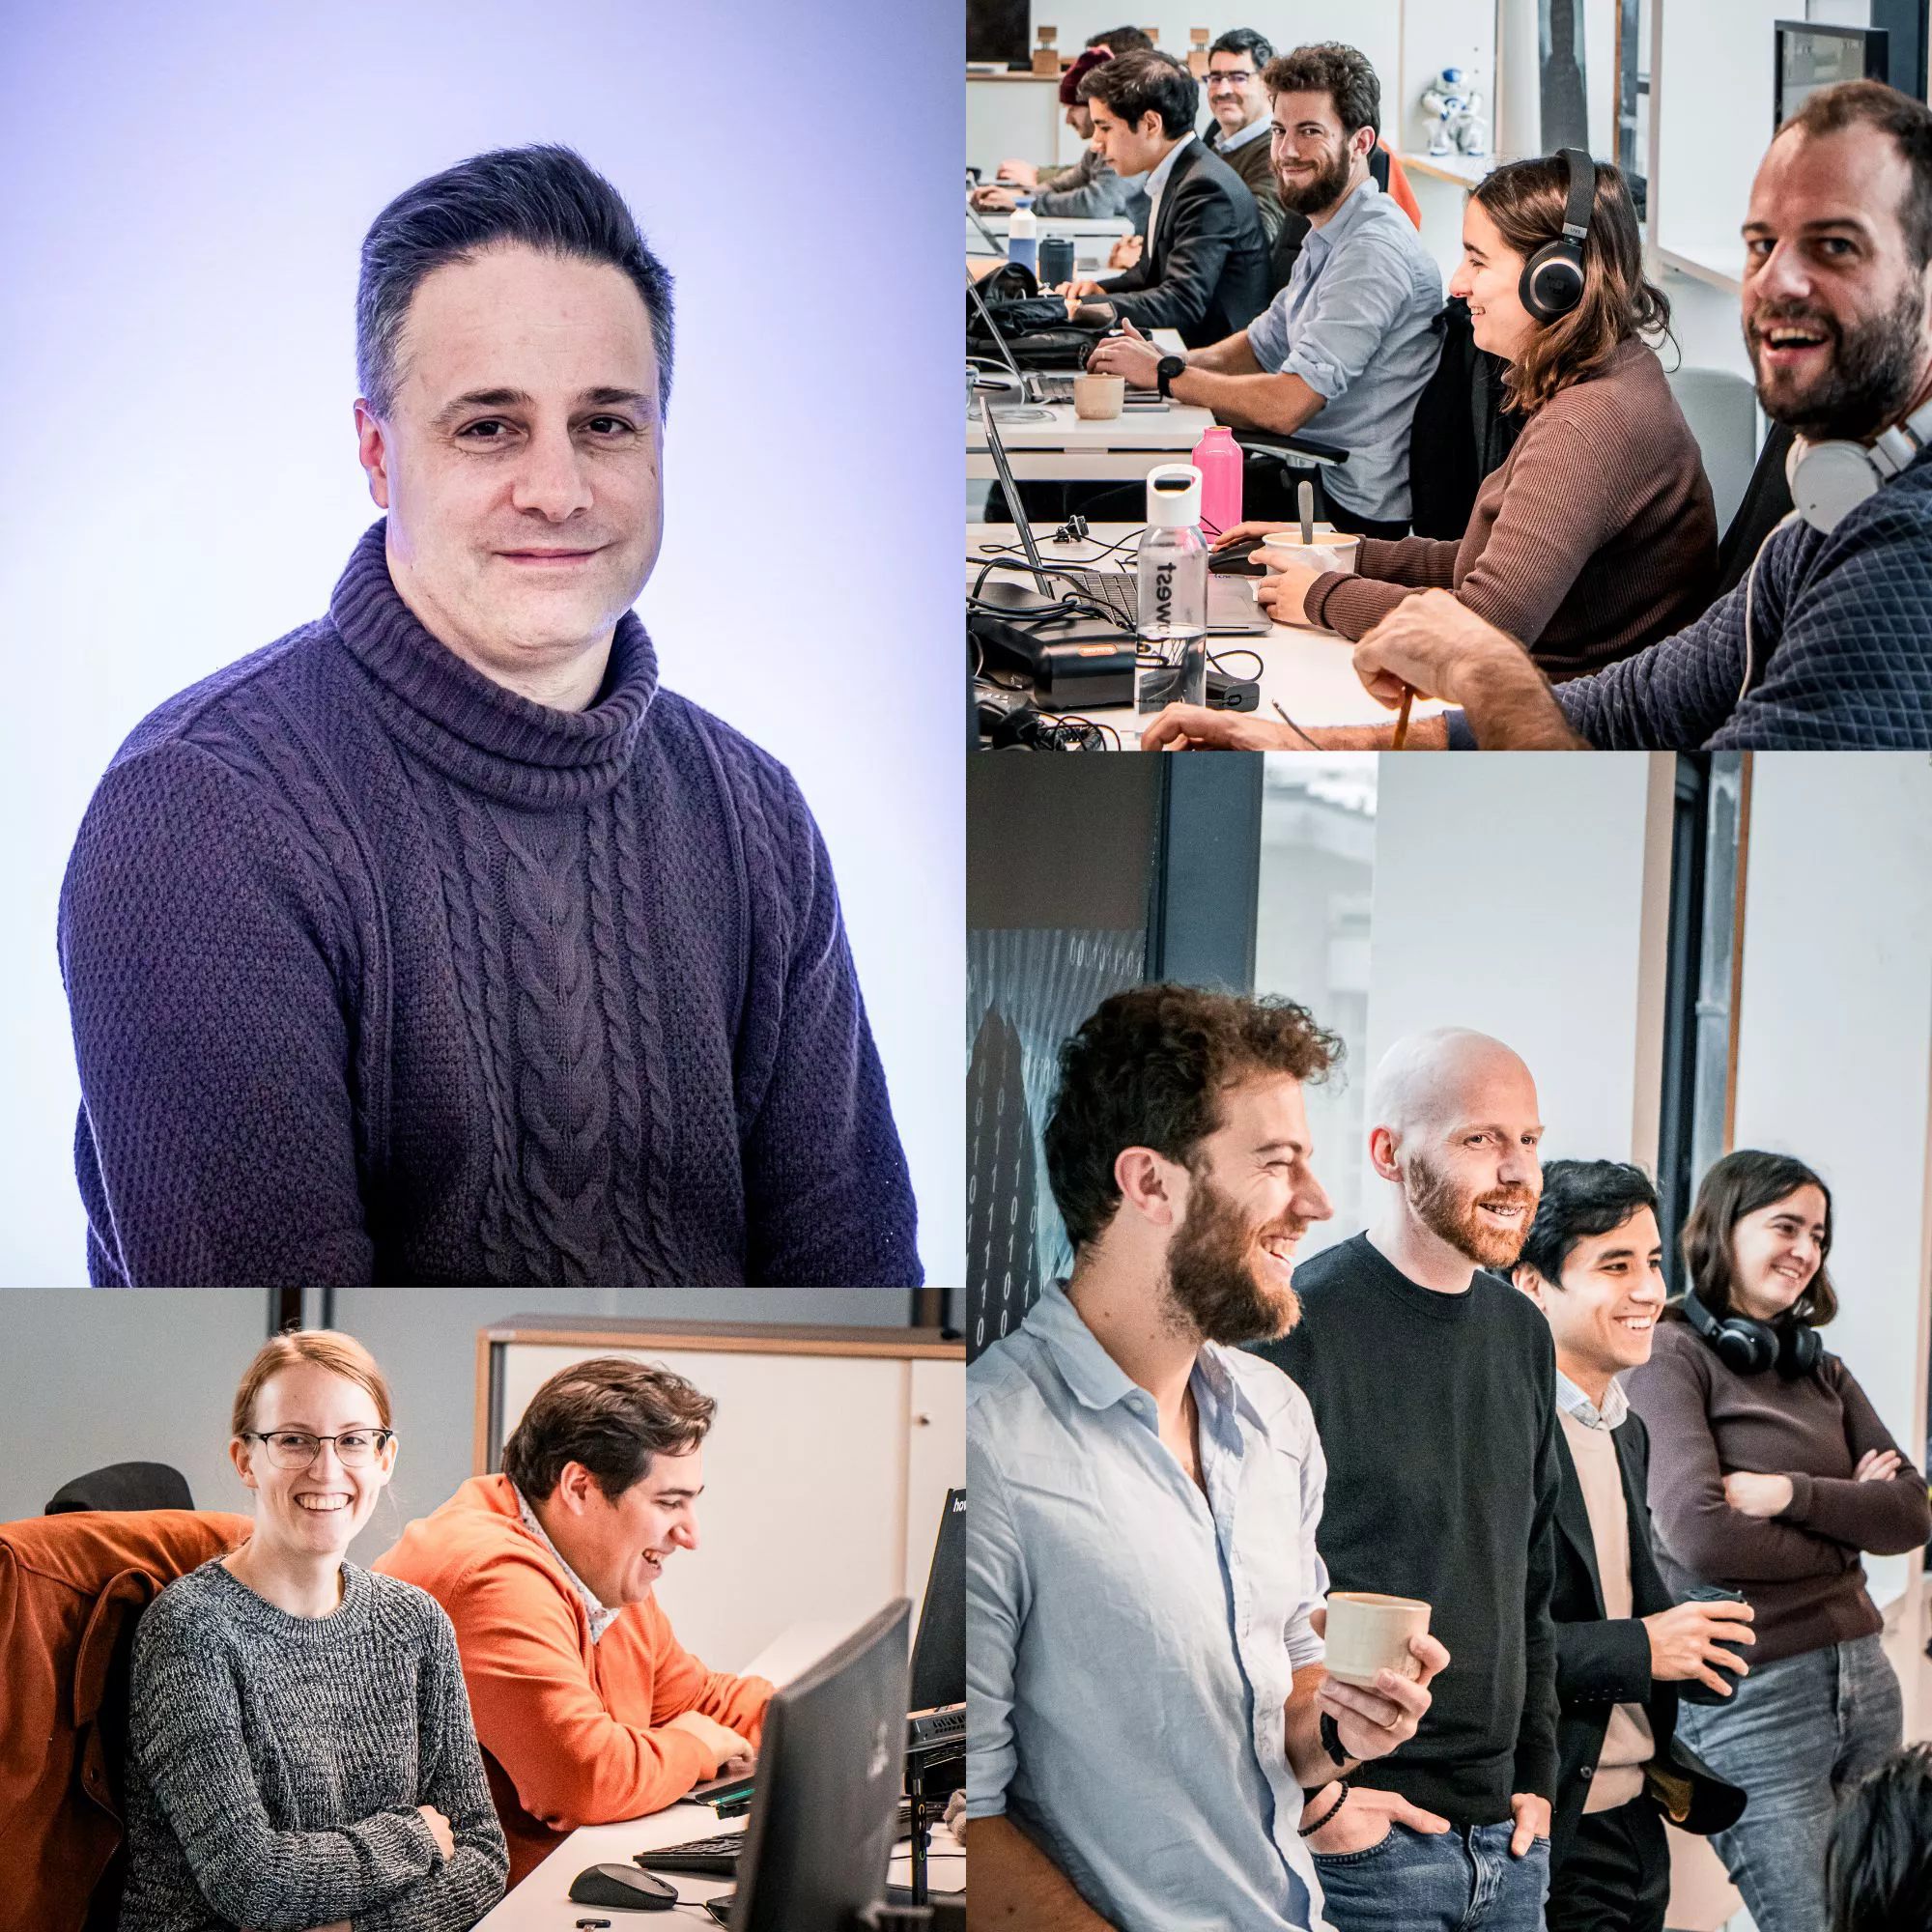 Collage of the team members of the research group